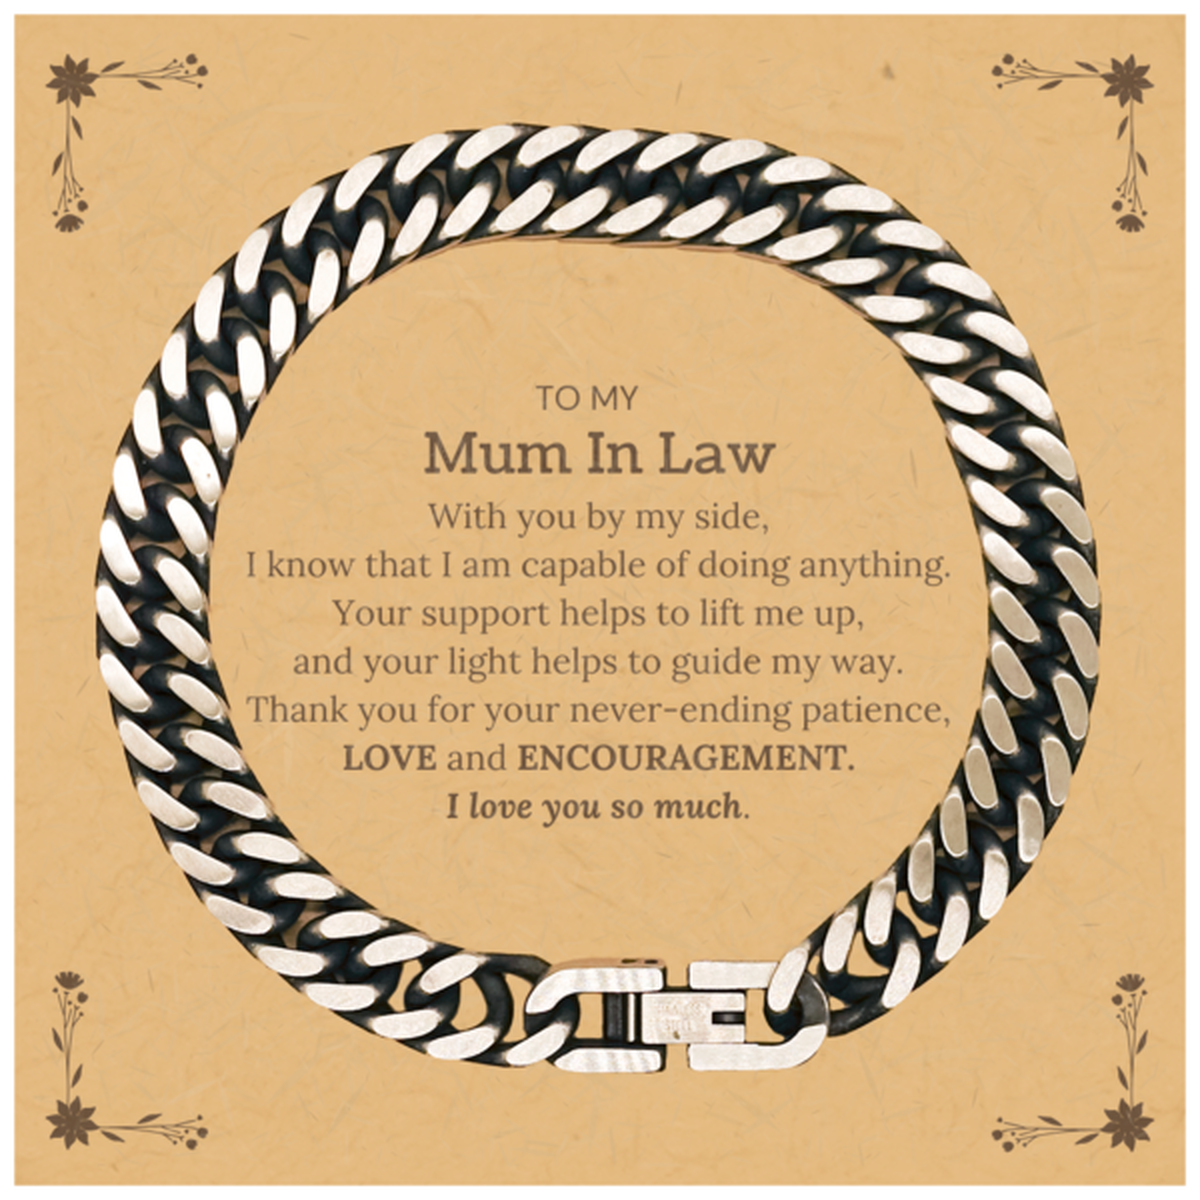 Appreciation Mum In Law  Cuban Link Chain Bracelet Gifts, To My Mum In Law  Birthday Christmas Wedding Keepsake Gifts for Mum In Law  With you by my side, I know that I am capable of doing anything. I love you so much